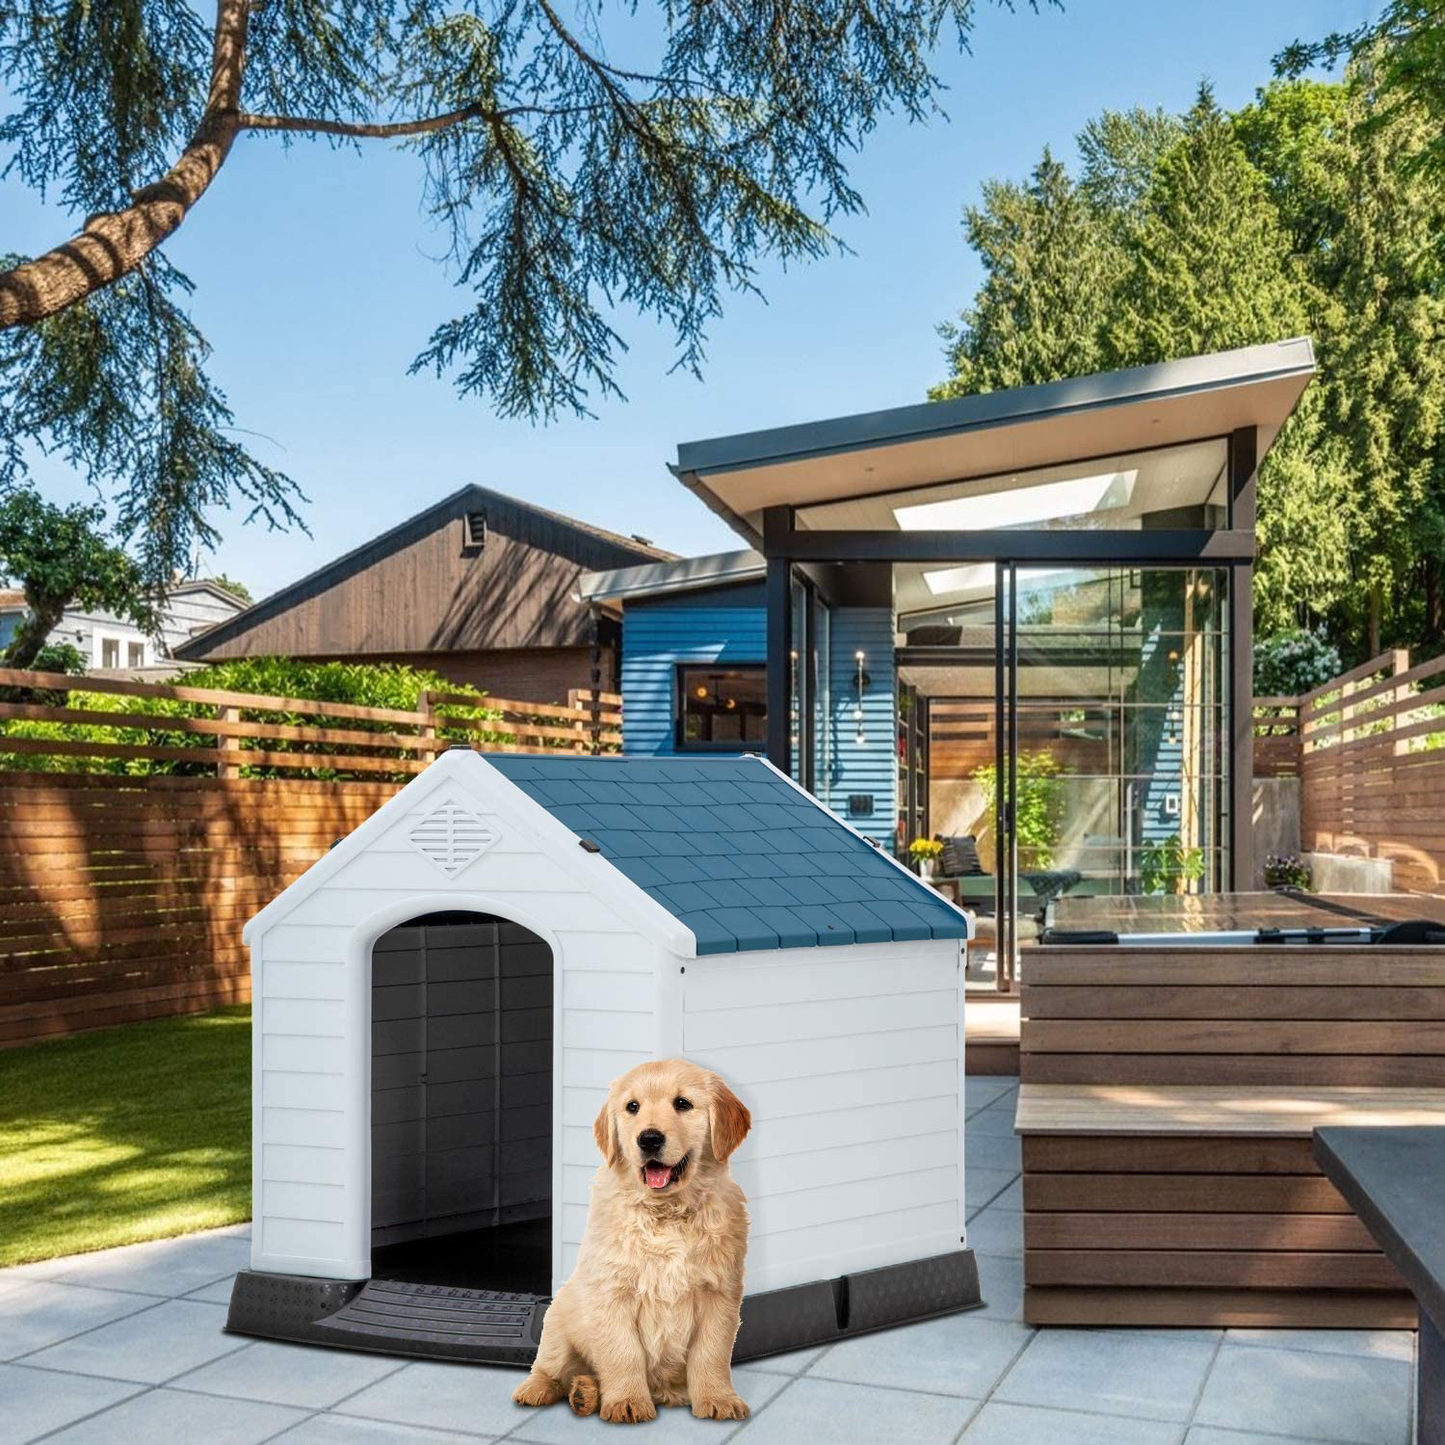 Dog House Doghouse House for Large Dog Large Dog House Dog Houses for Large Dogs Small Dog House Pet House Dog House Outdoor All Weather Dog House, with Base Support for Winter Tough Durable House Animals & Pet Supplies > Pet Supplies > Dog Supplies > Dog Houses BestShop   